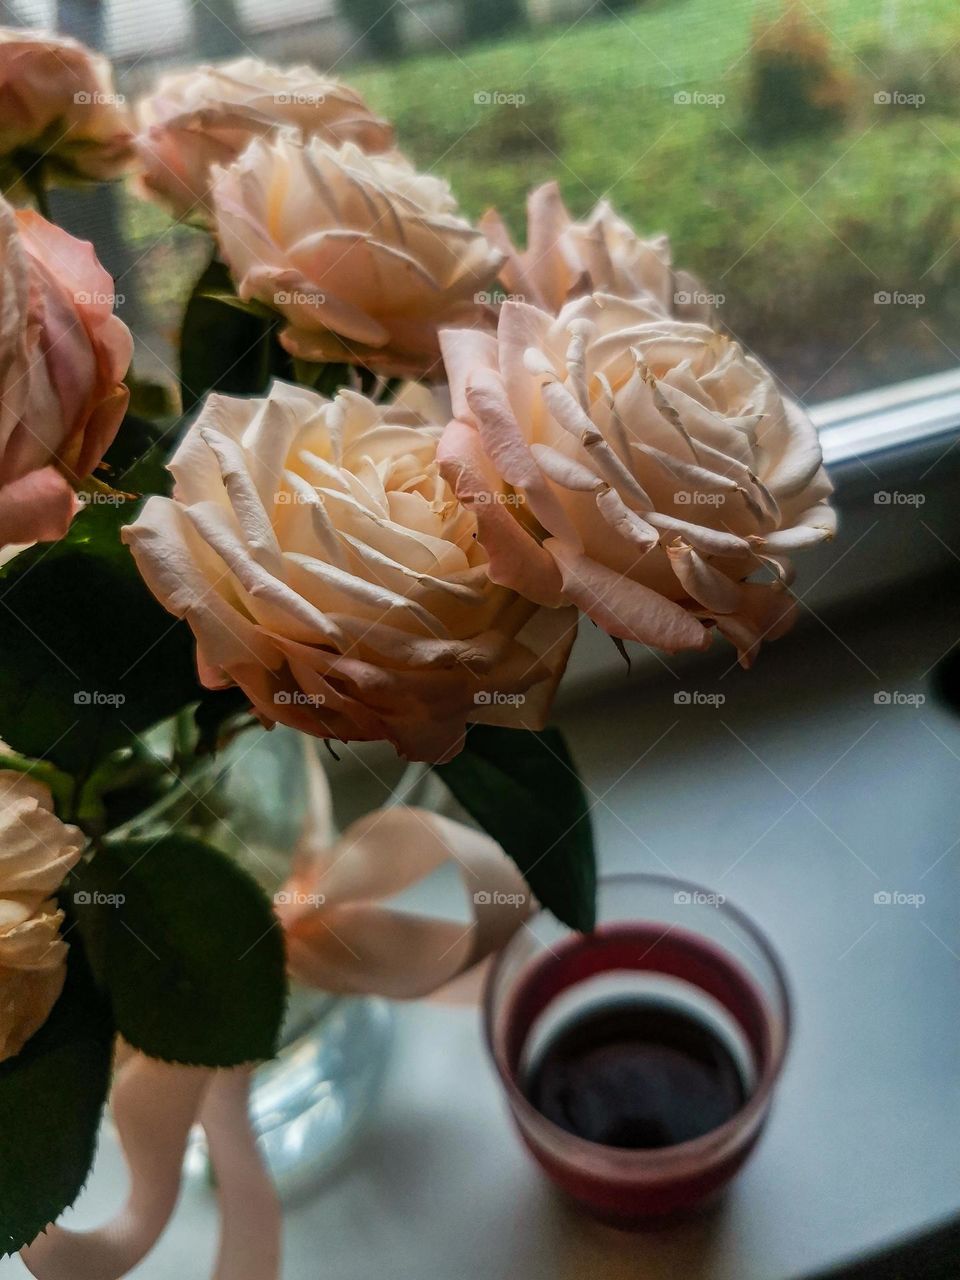 Perfectly beautiful and tender pink roses in a glass vase near the window and cup of fresh coffee